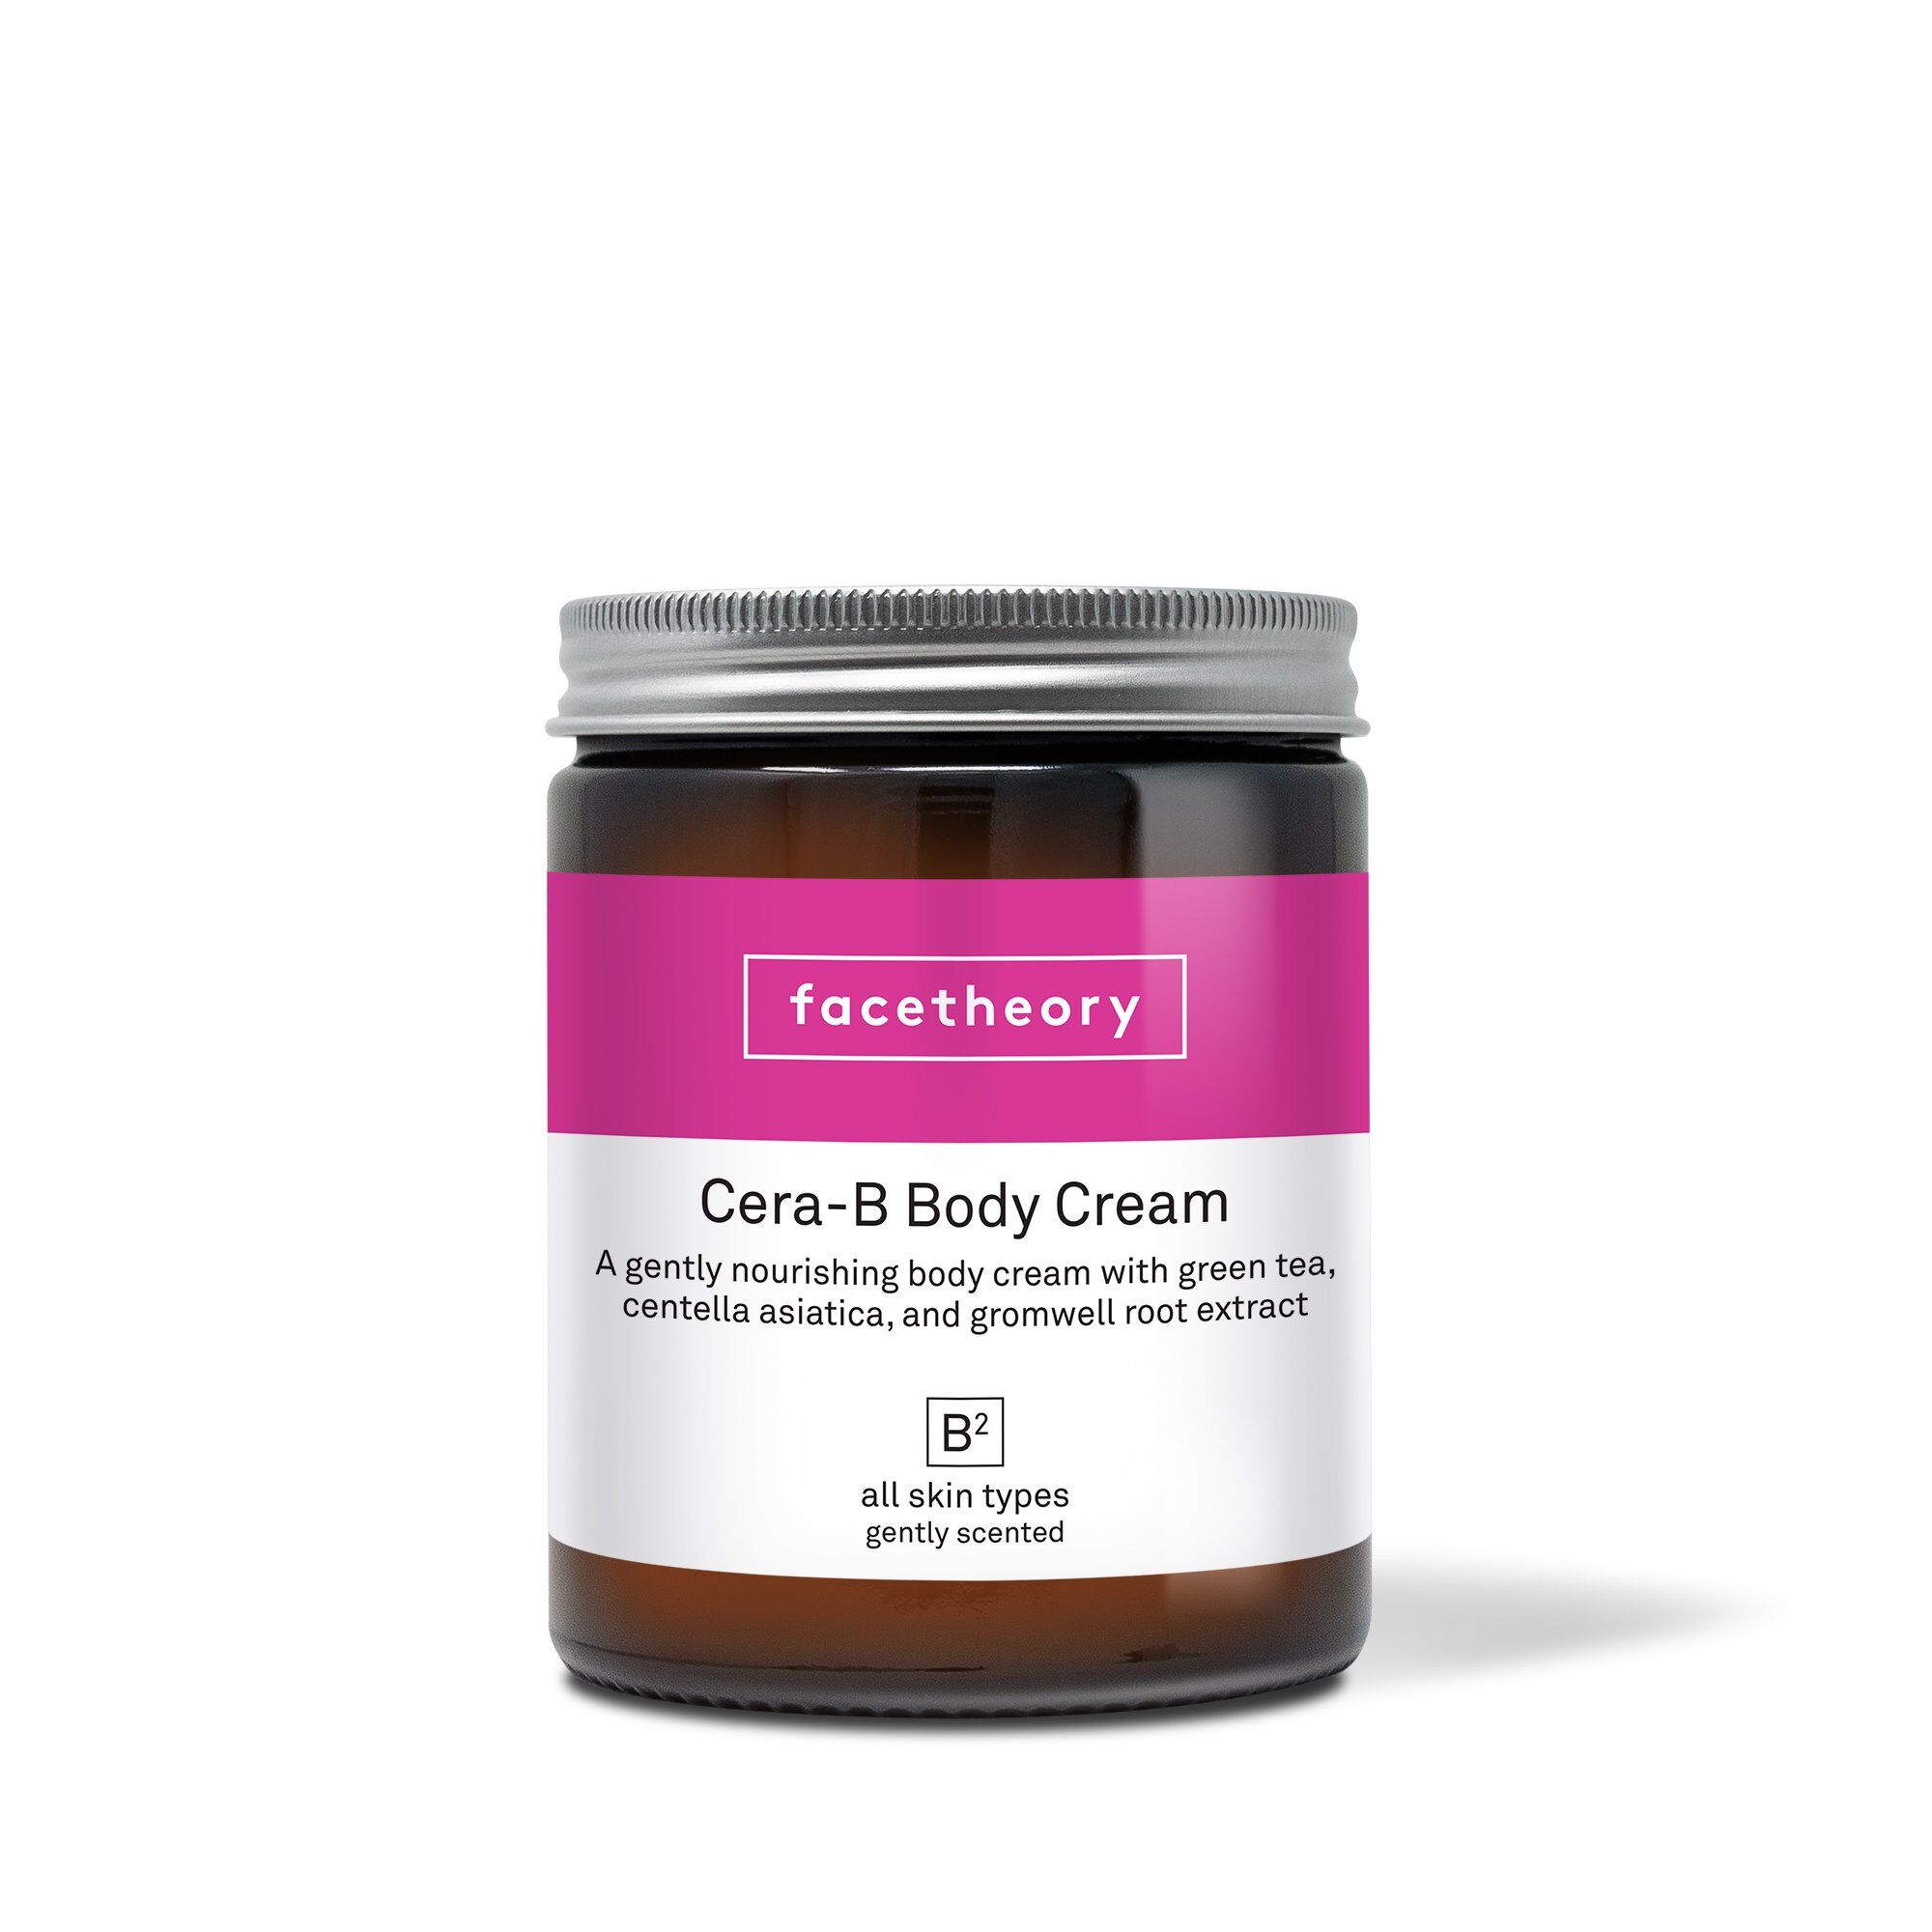 Facetheory - Cera-B Body Cream B2 with Centella Asiatica and Gromwell Root Extract Scented